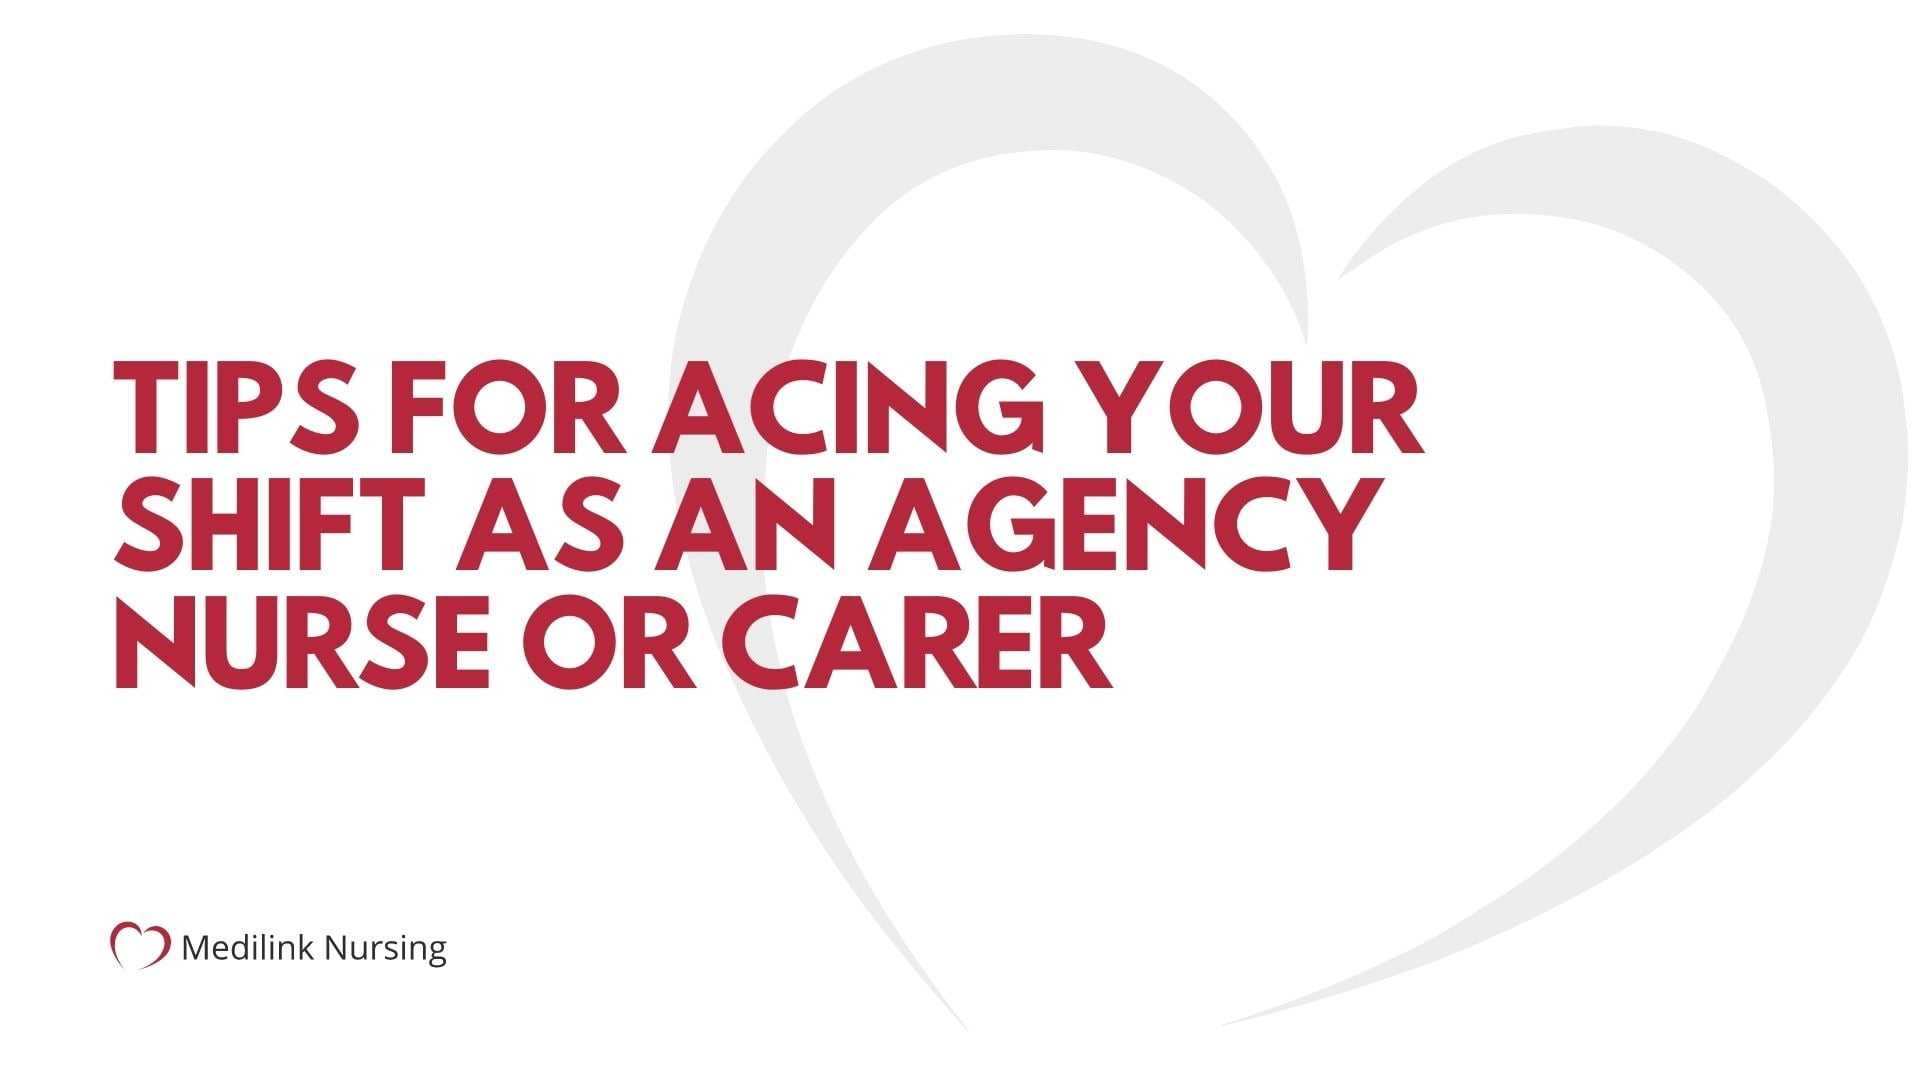 Tips For Acing Your Shift As An Agency Nurse Or Carer